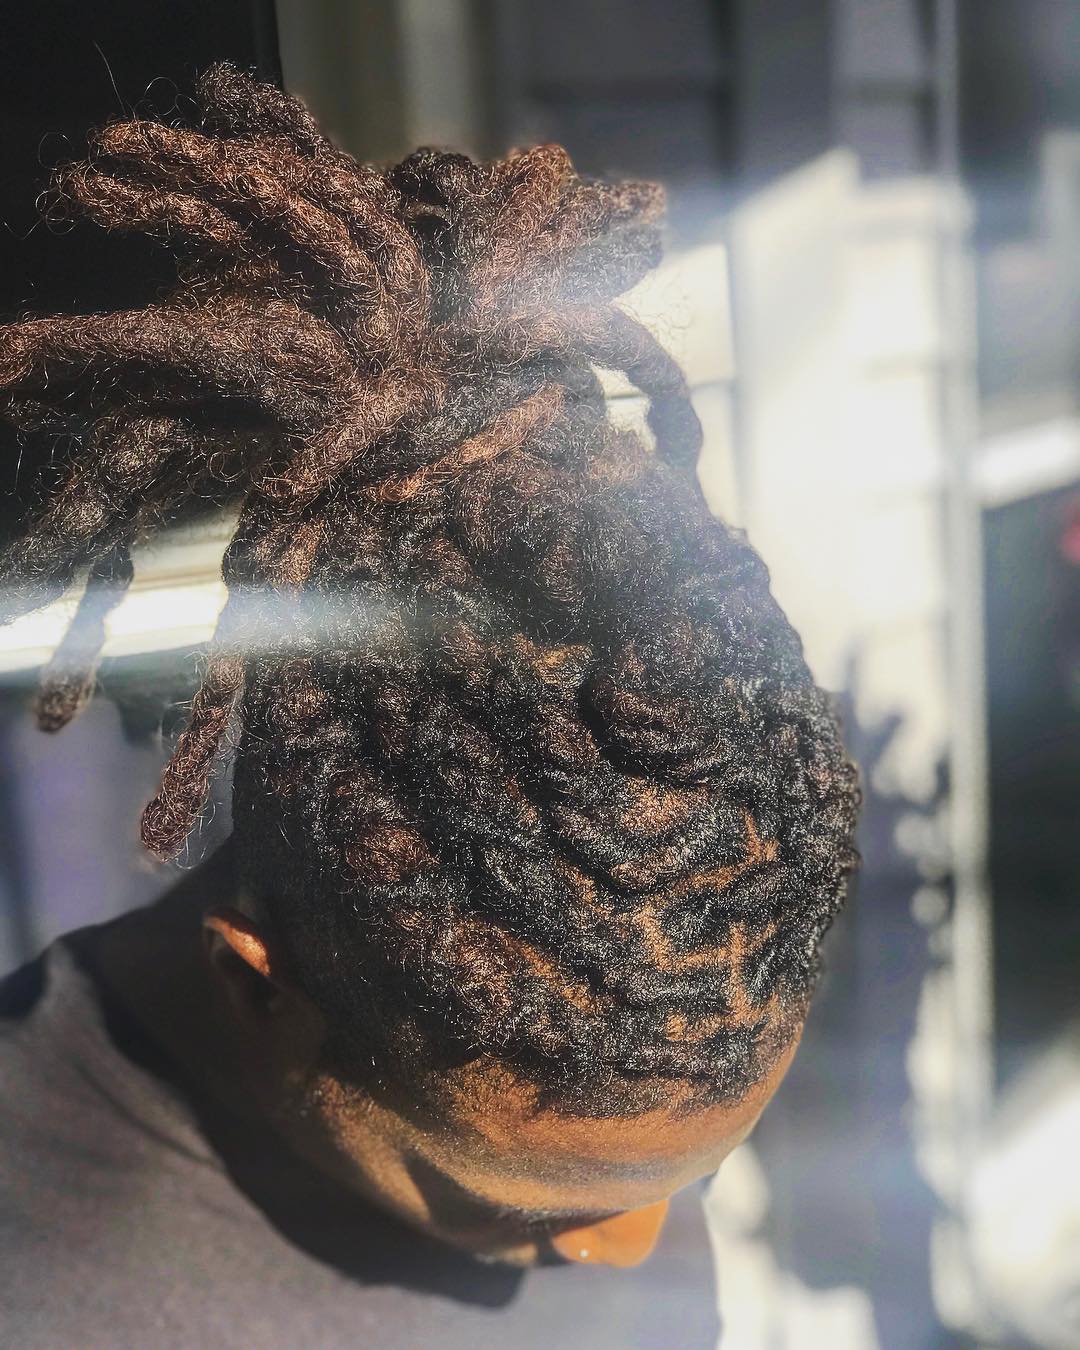 This Hairstylist Makes Faux Locs Look Like The Real Deal